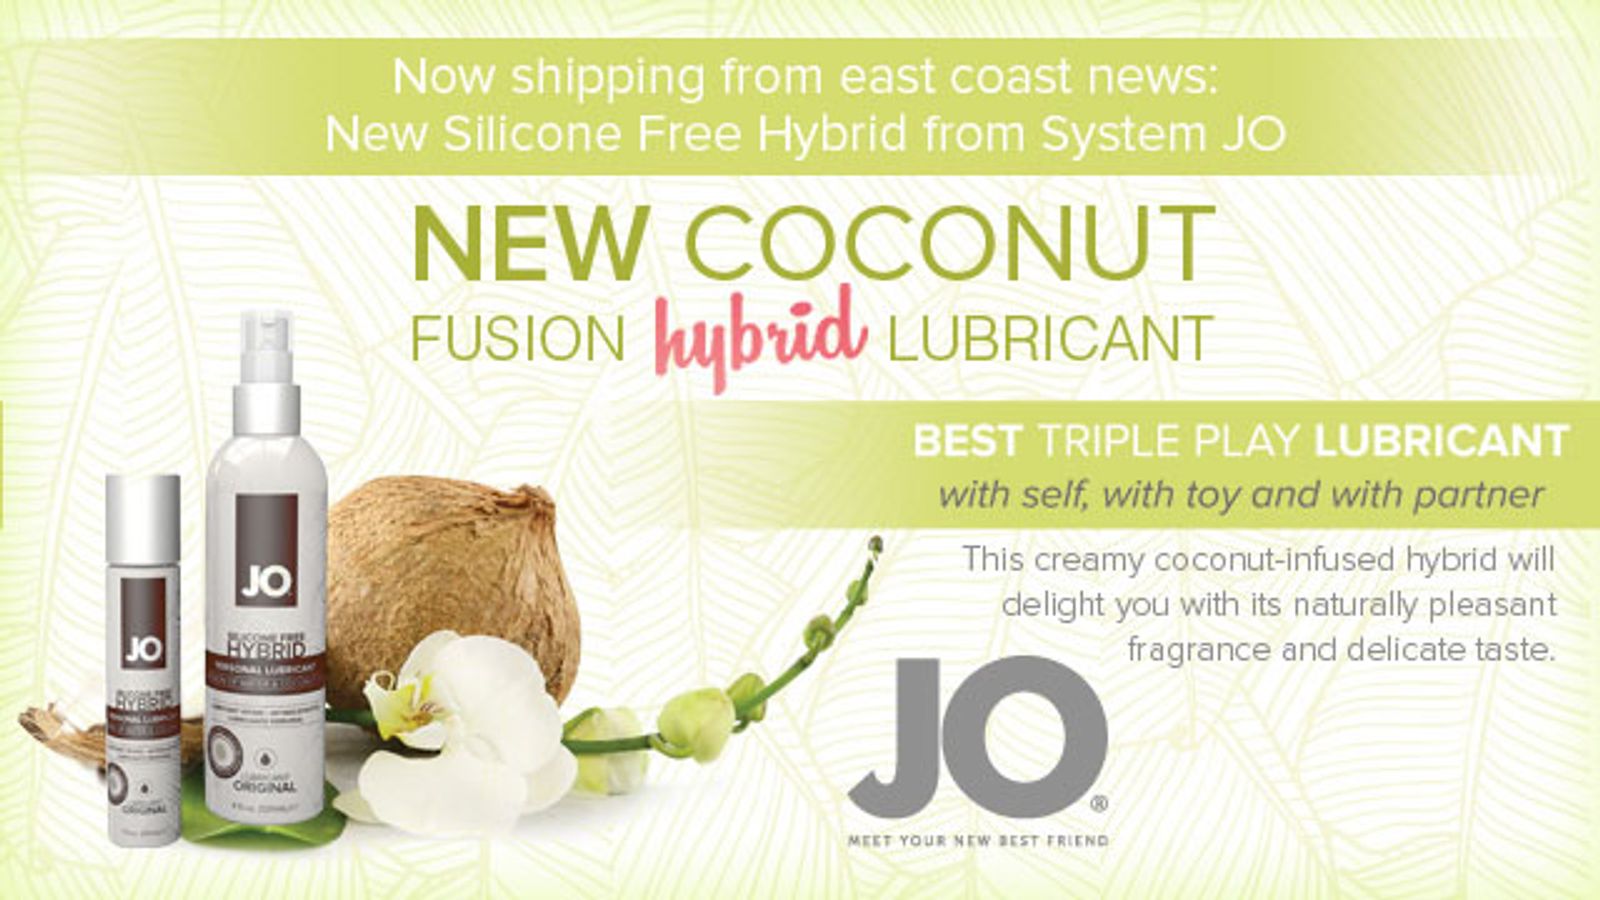 East Coast News Shipping New Silicone-Free Hybrid from System JO